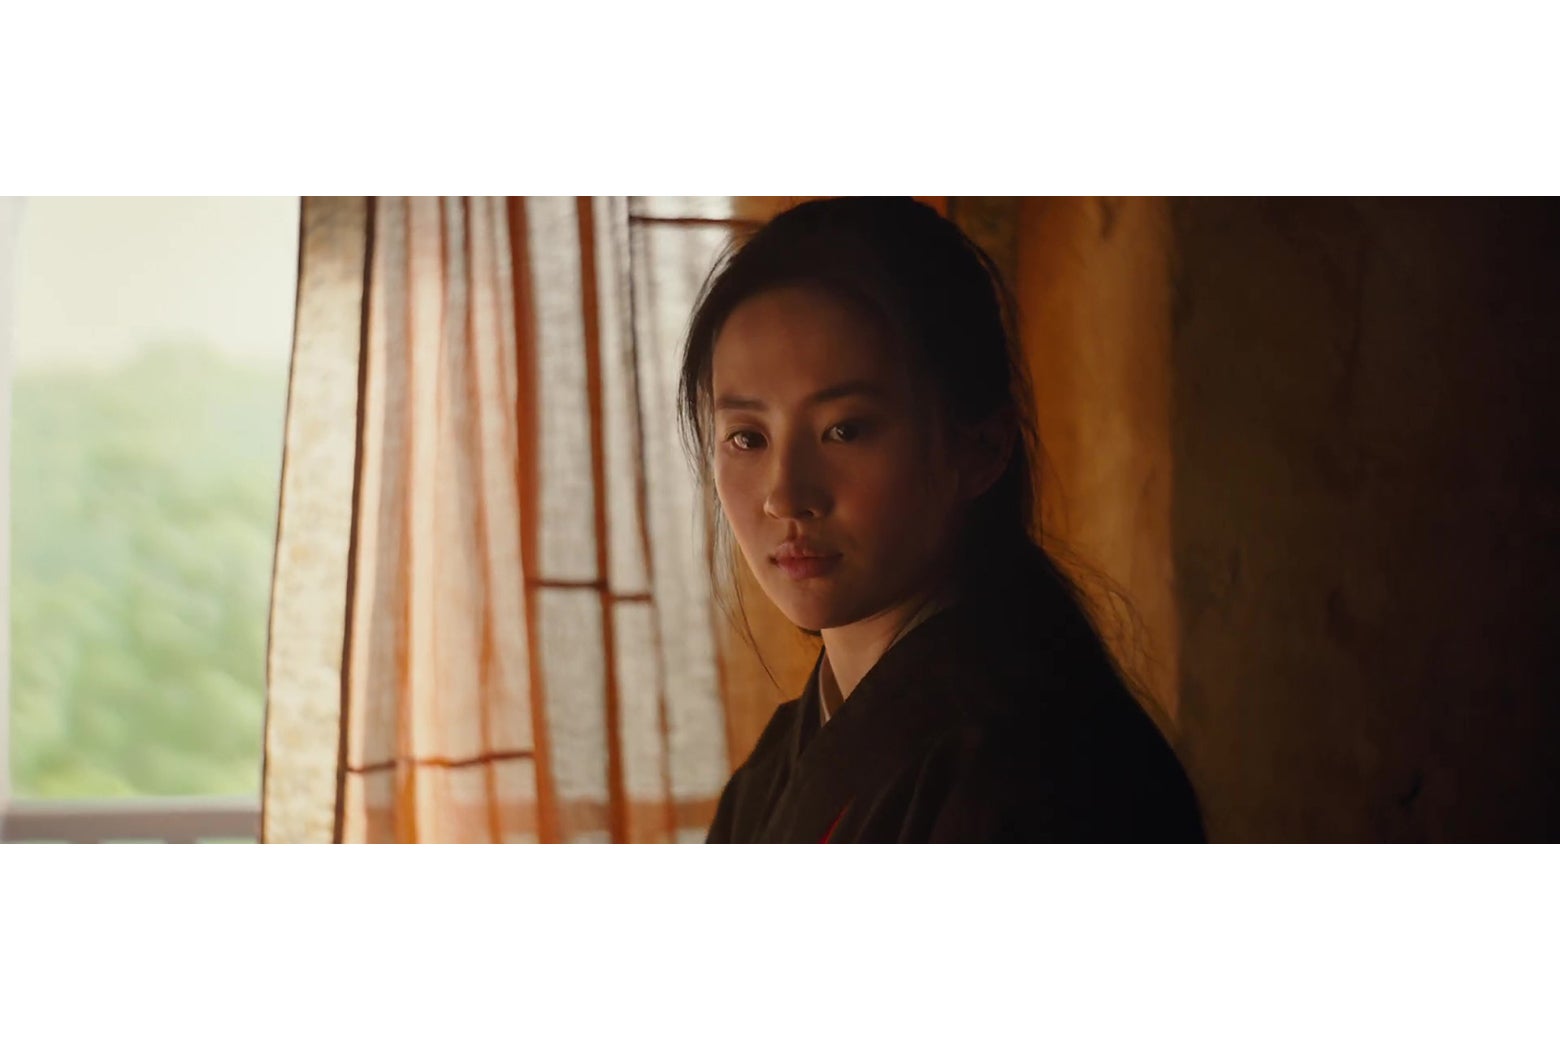 Liu Yifei in a still from Mulan; an overly-bright window and a very dark interior wall are behind her.